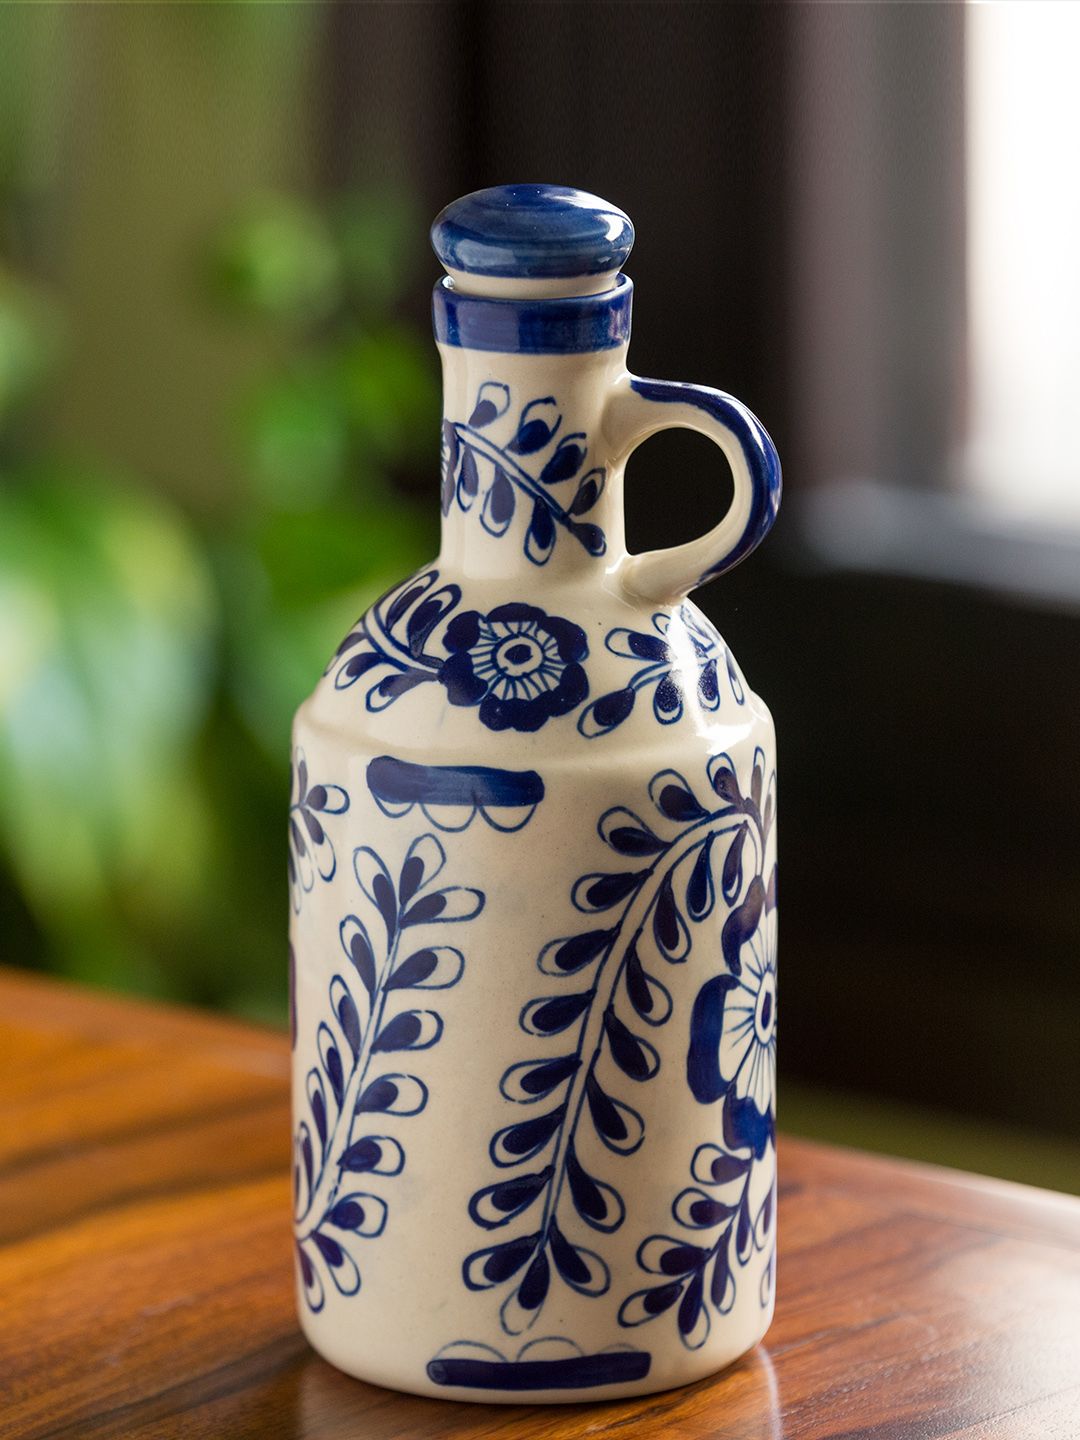 ExclusiveLane White & Blue Mughal Gardens Handcrafted Ceramic Printed Oil Dispenser Price in India